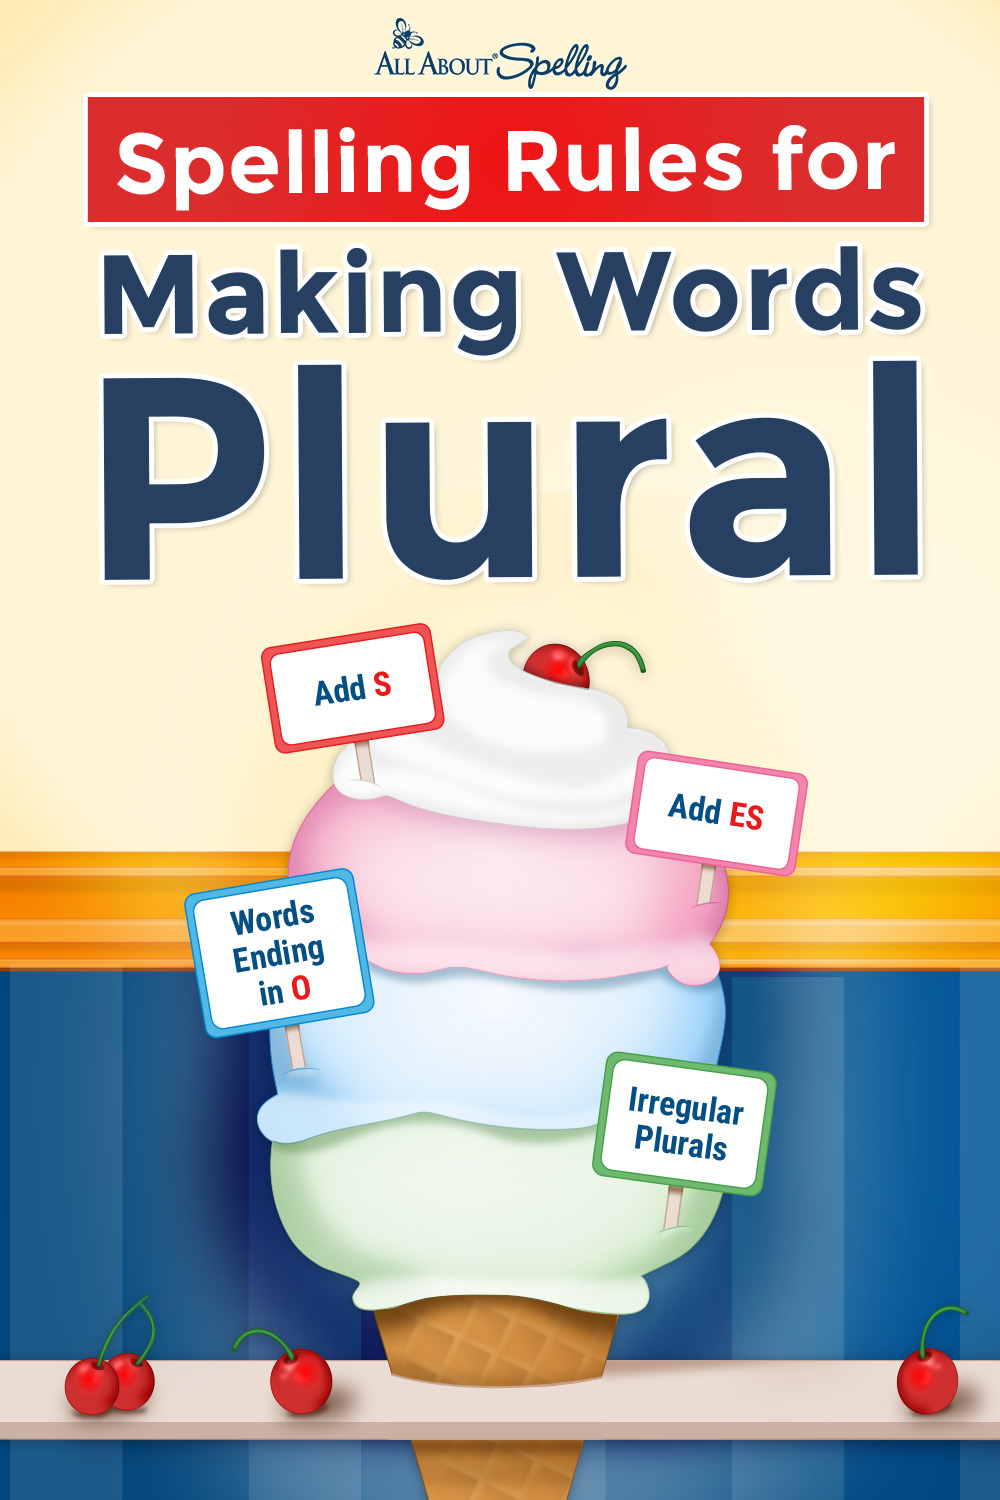 Spelling Rules for Making Words Plural (Video + Poster!)